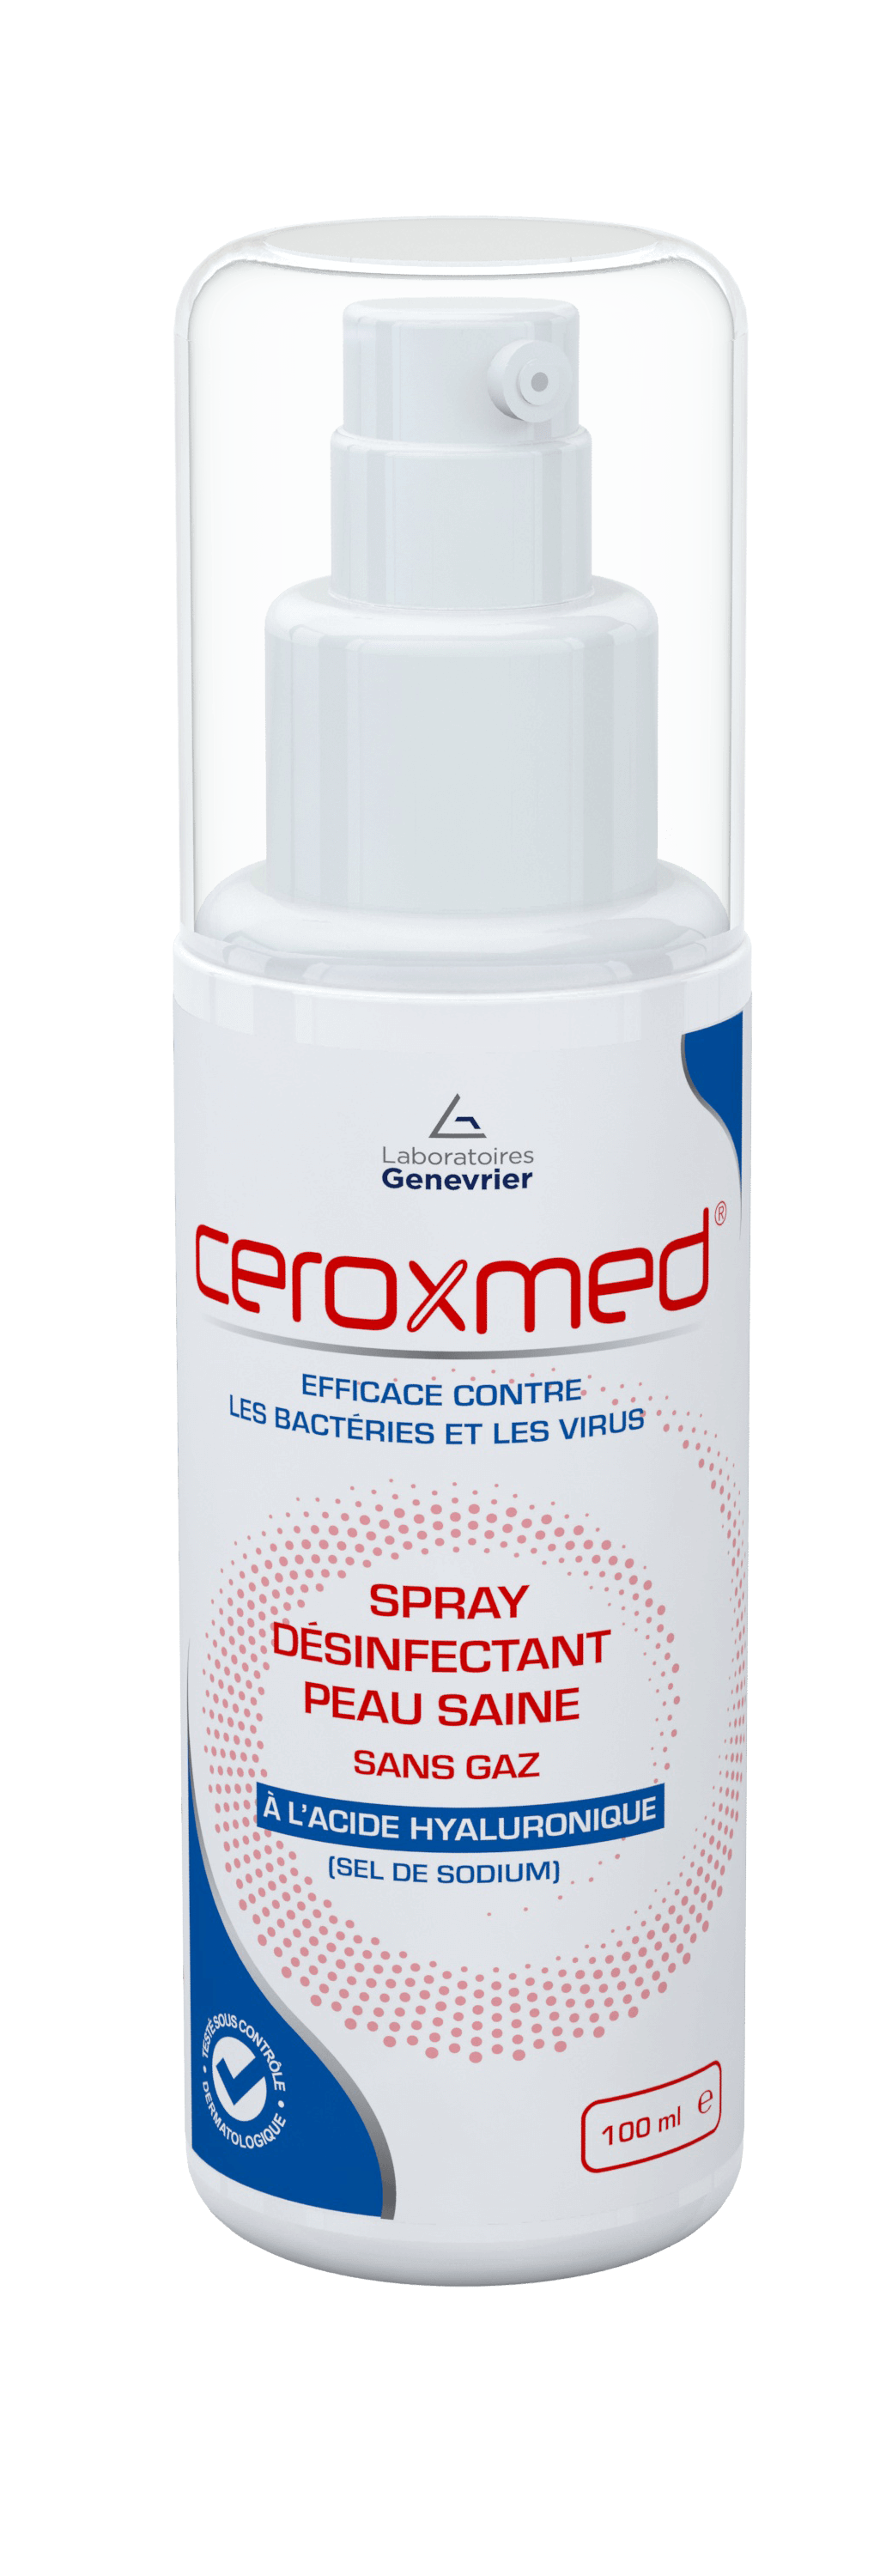 image CEROXMED SPRAY DESINFECTANT PRIX MALIN AOUT